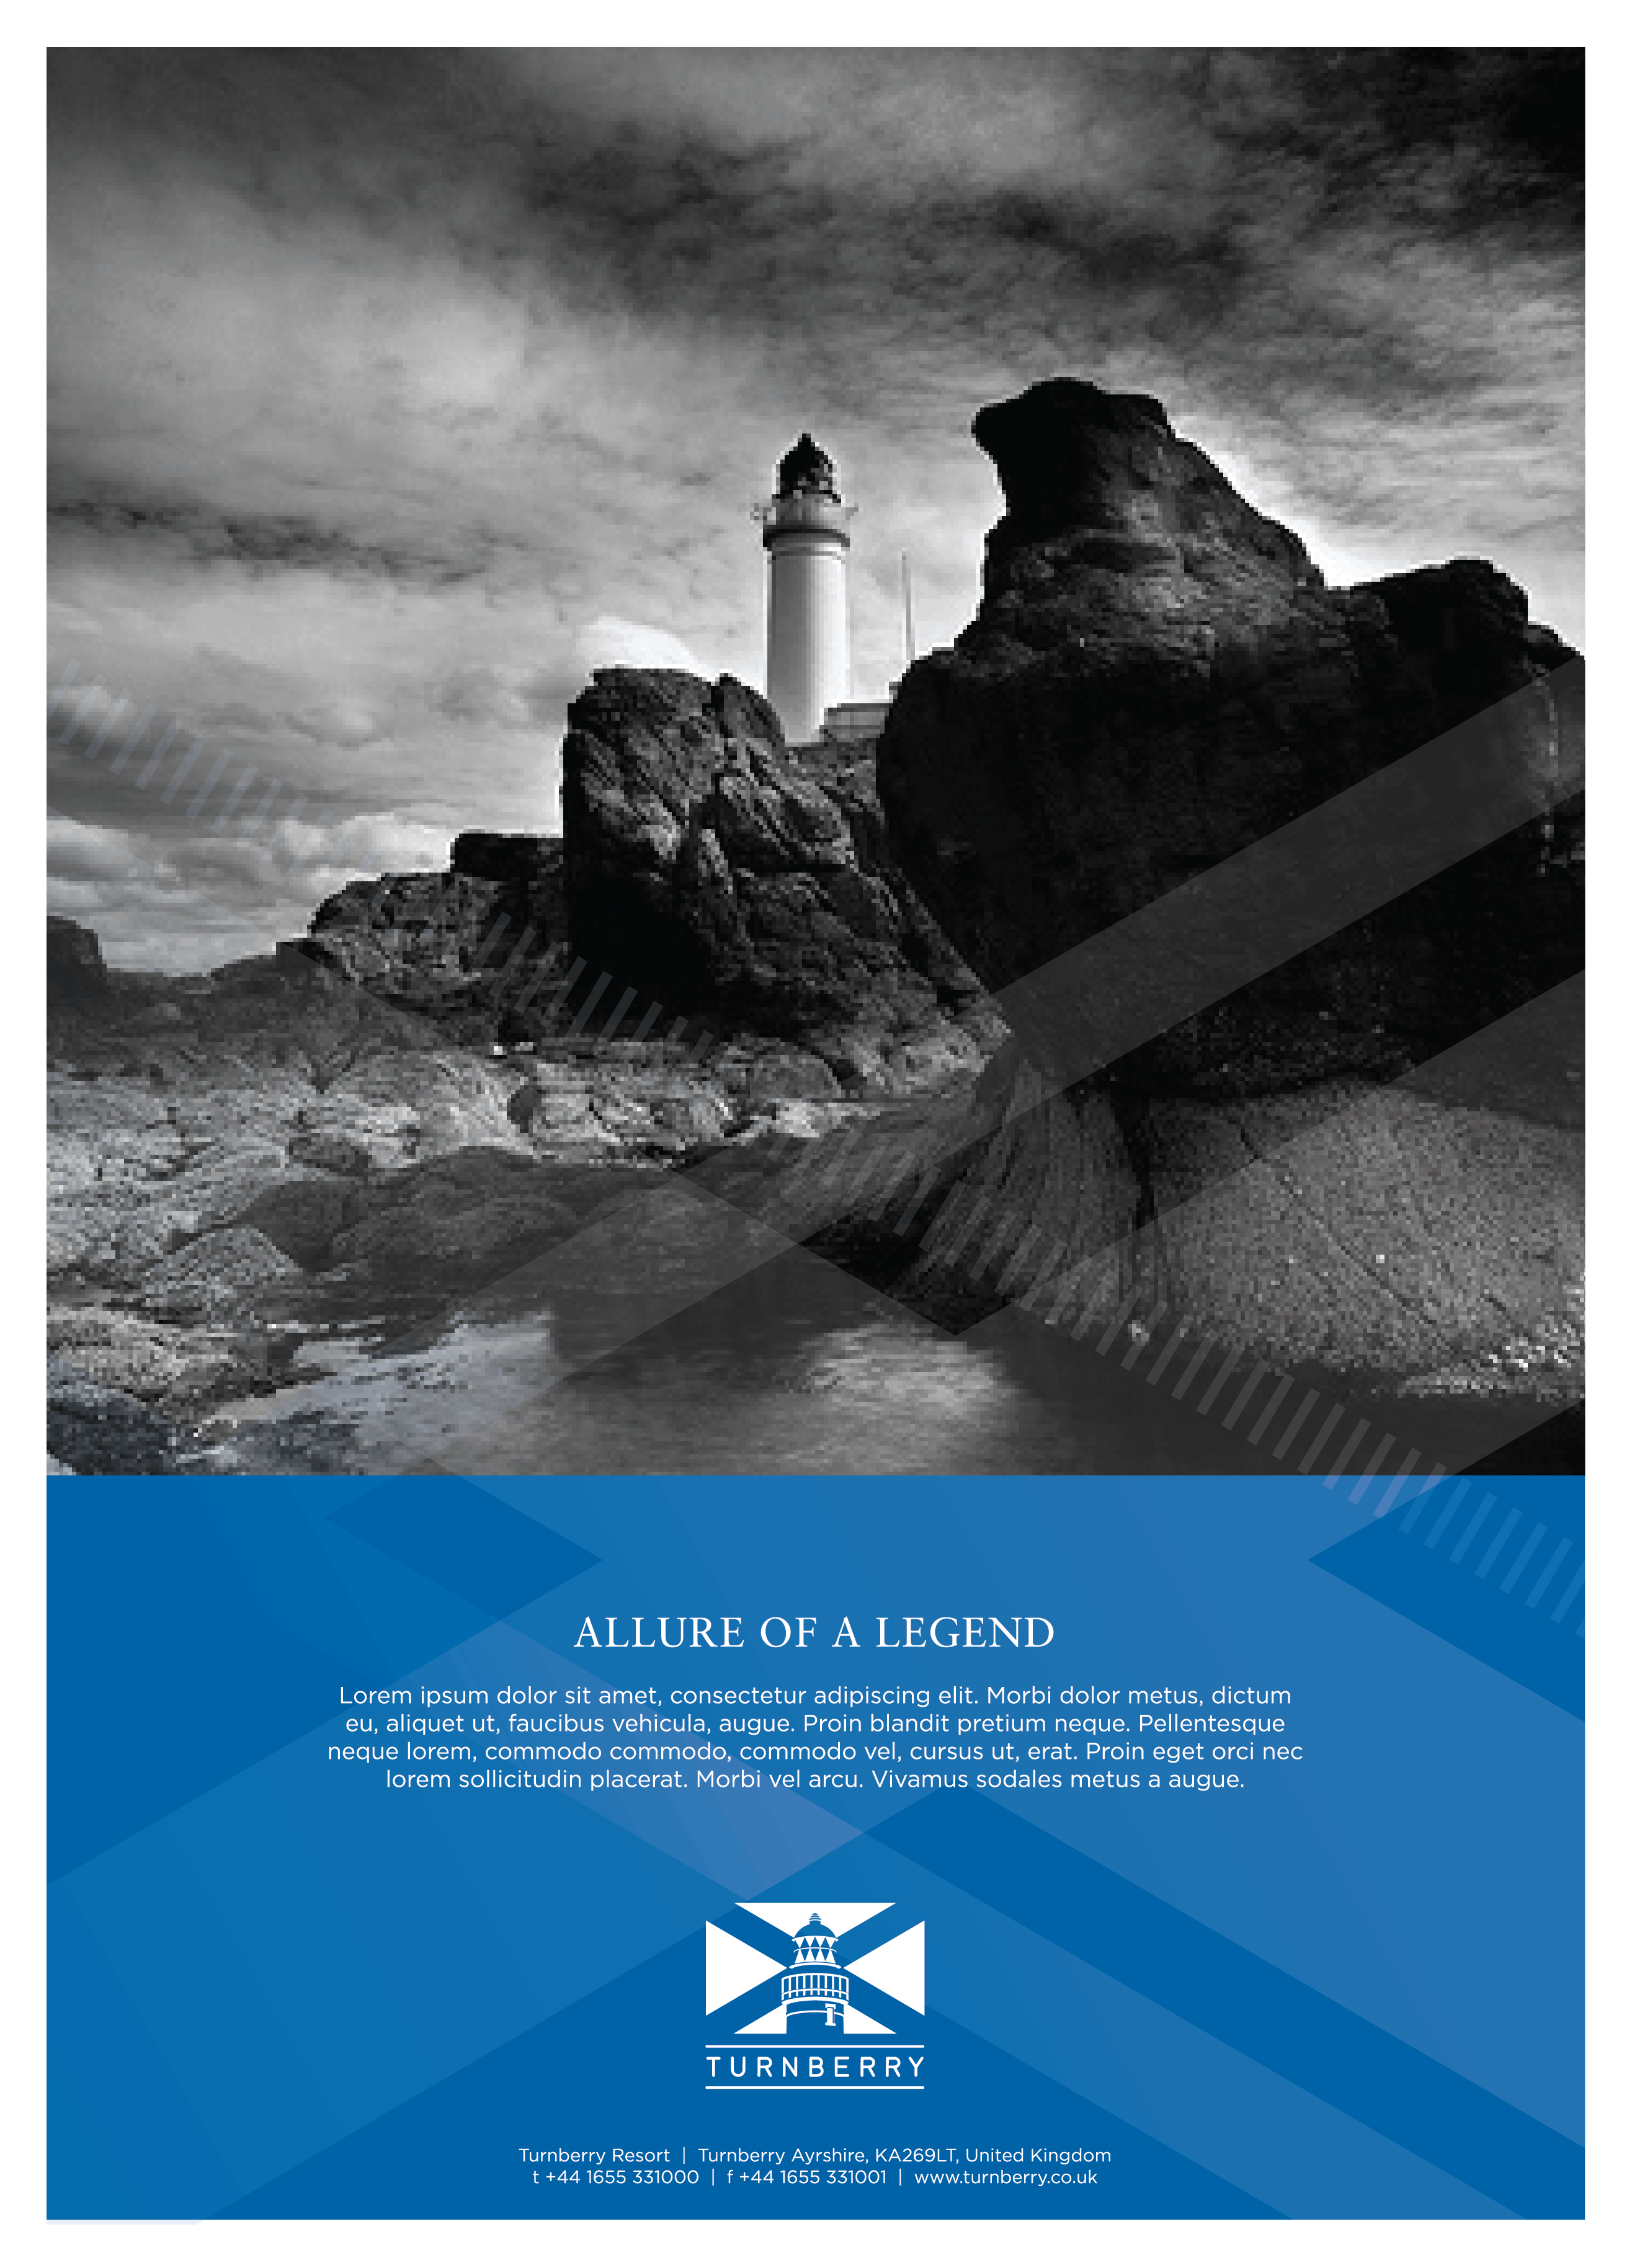 Ad for Turnberry